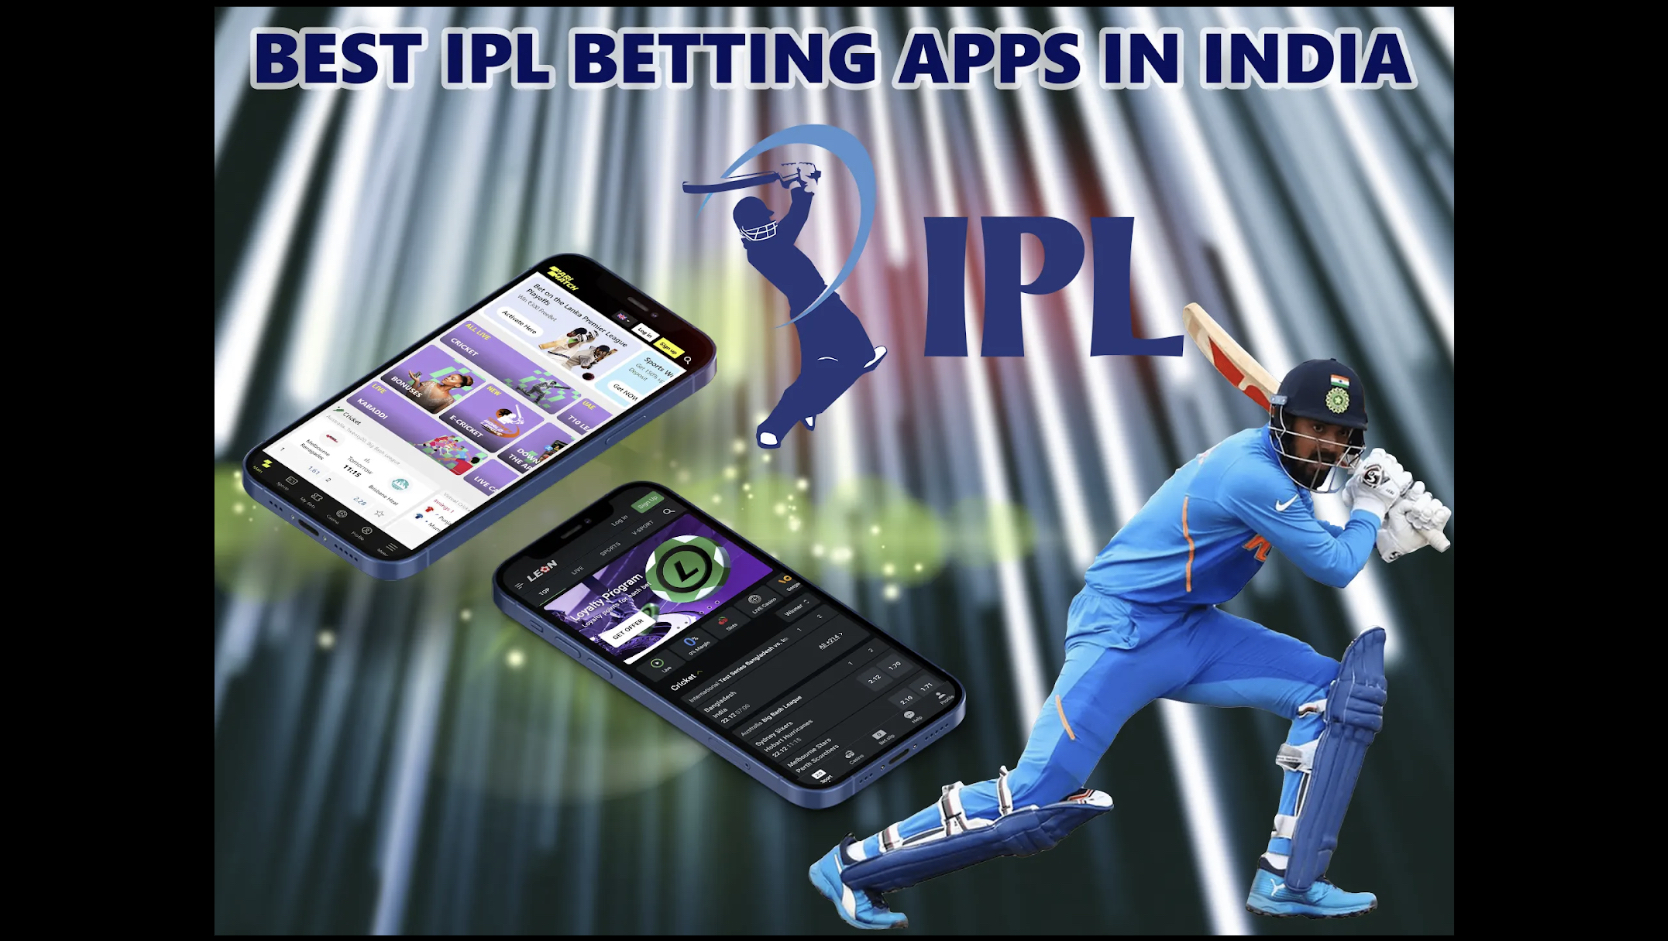 3 Easy Ways To Make Ipl Betting App In India Faster